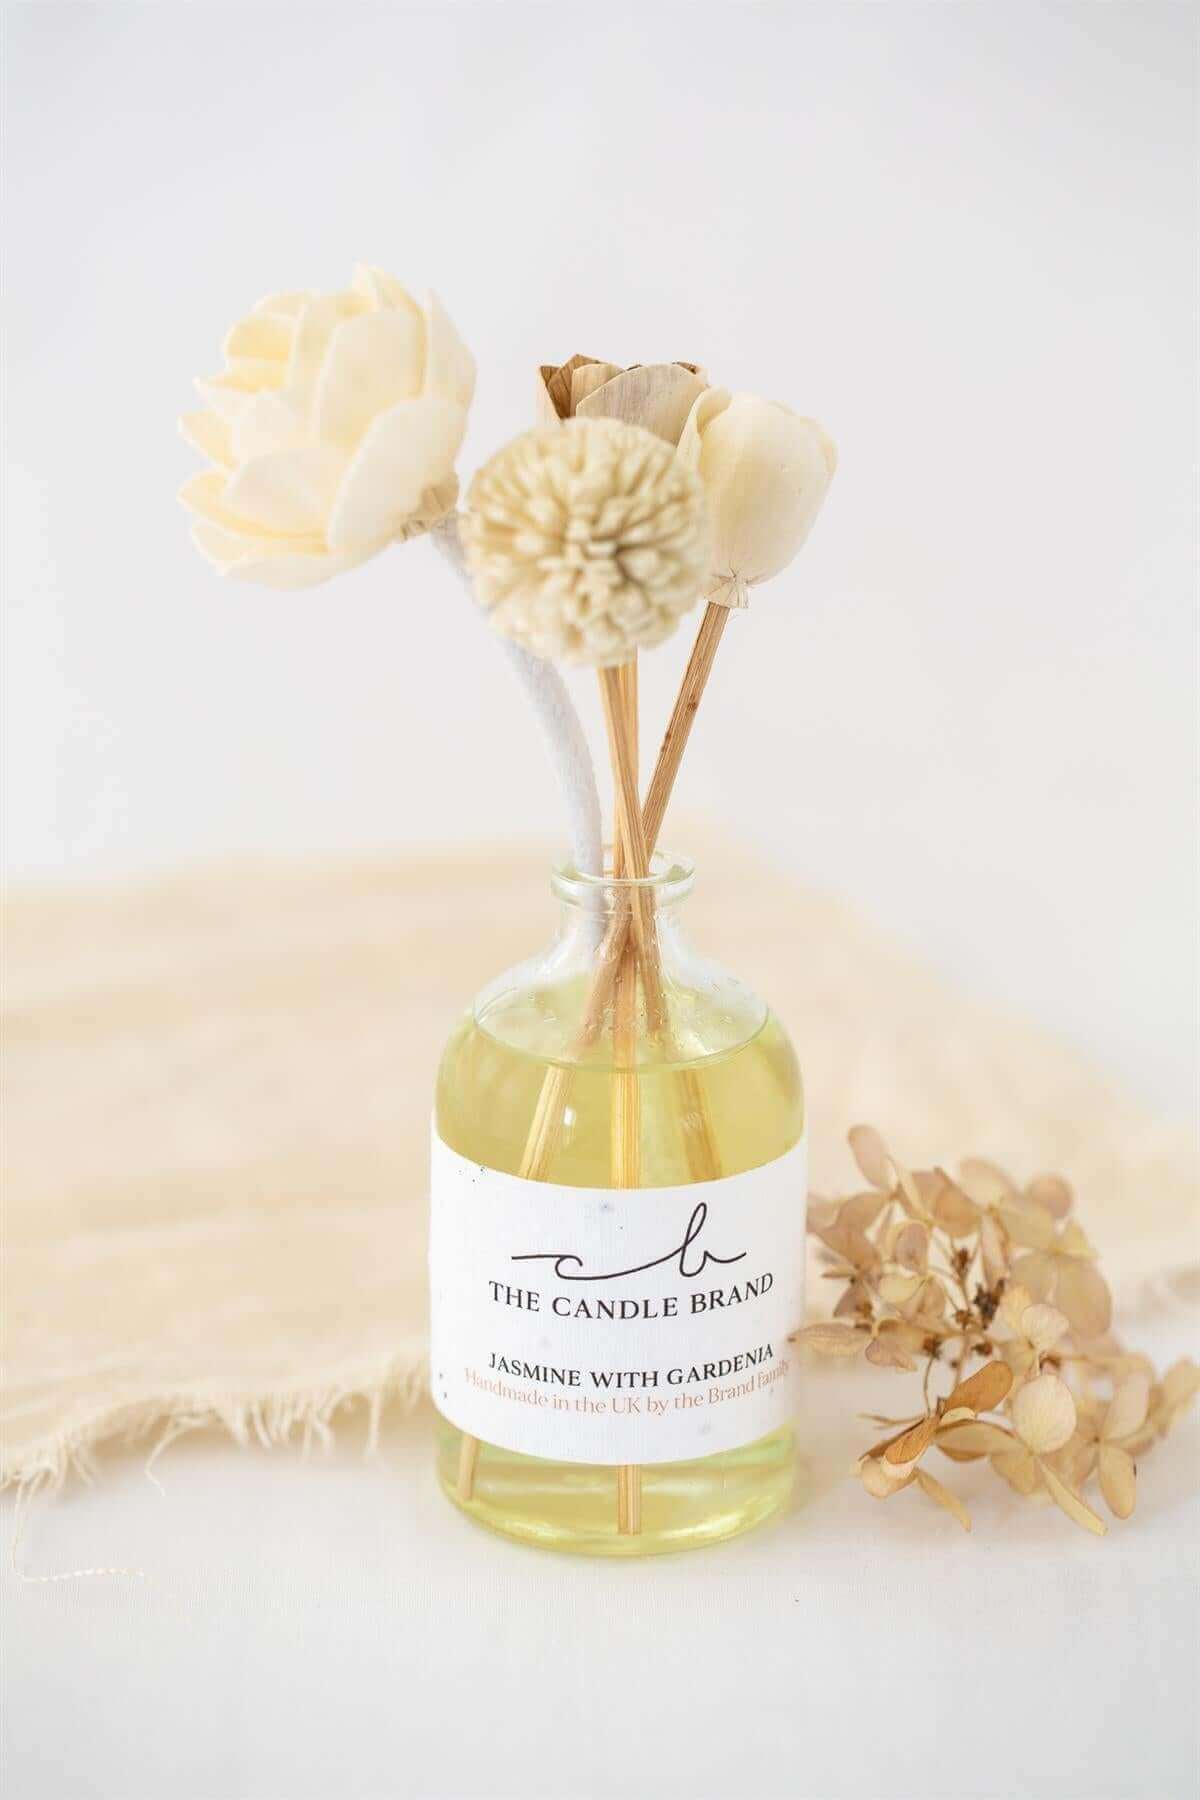 Eco-Friendly Jasmine with Gardenia Flower Diffuser The Candle Brand Home Fragrance